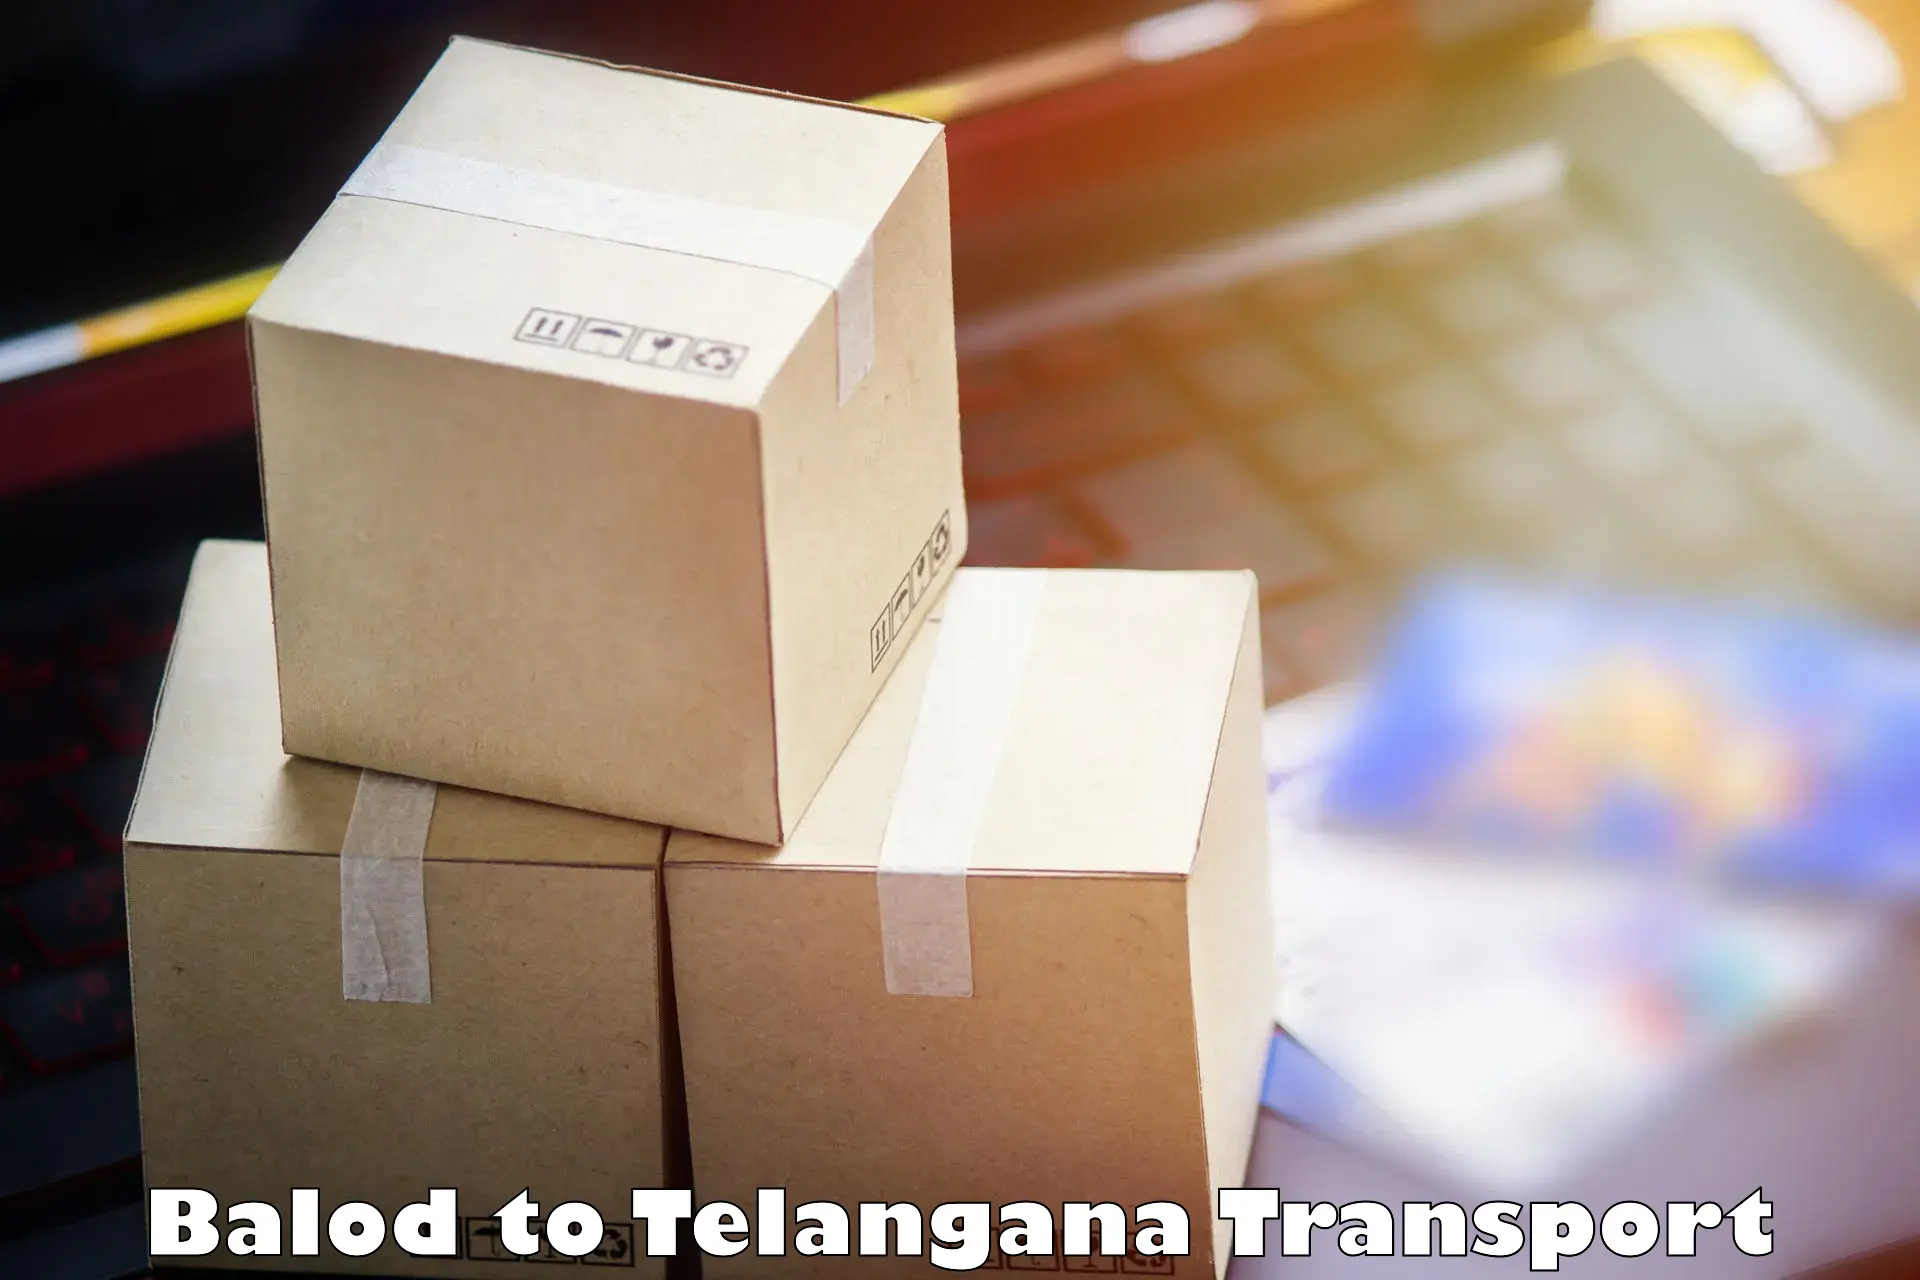 Commercial transport service Balod to Telangana